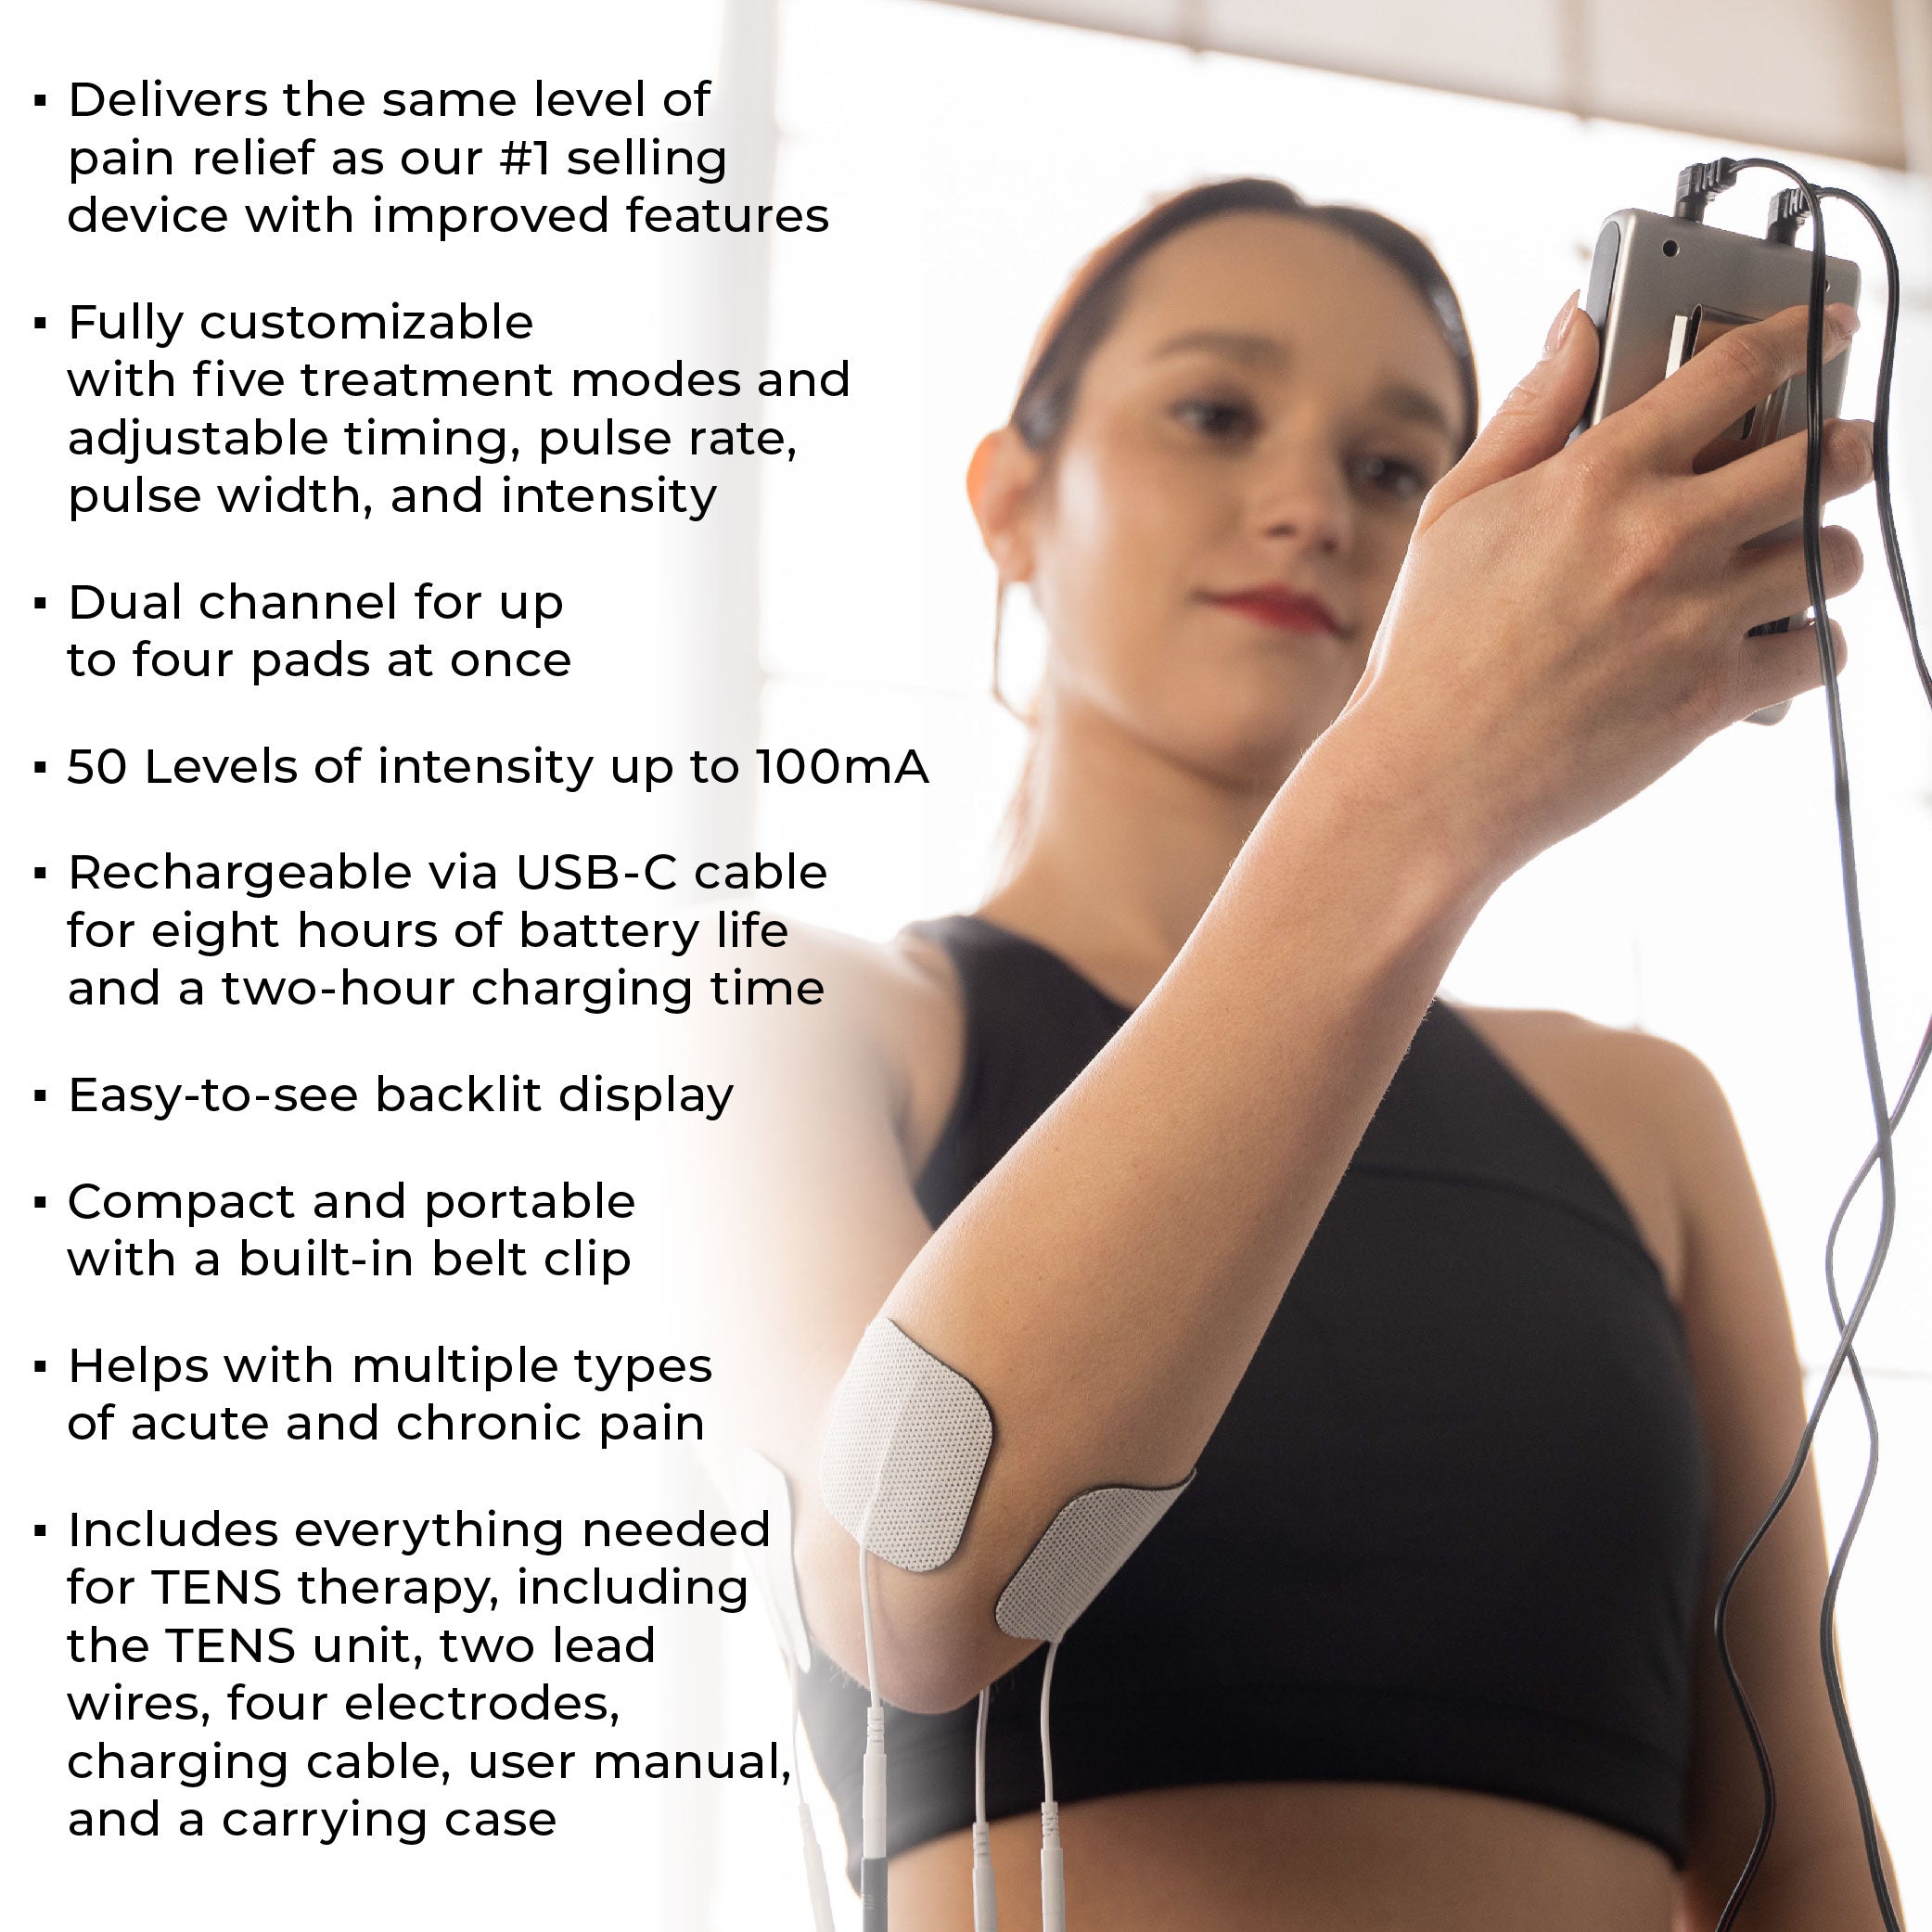 Easy@Home Rechargeable Compact Wireless TENS Unit - 510K Cleared, FSA  Eligible Electric EMS Muscle Stimulator Pain Relief Therapy, Portable Pain